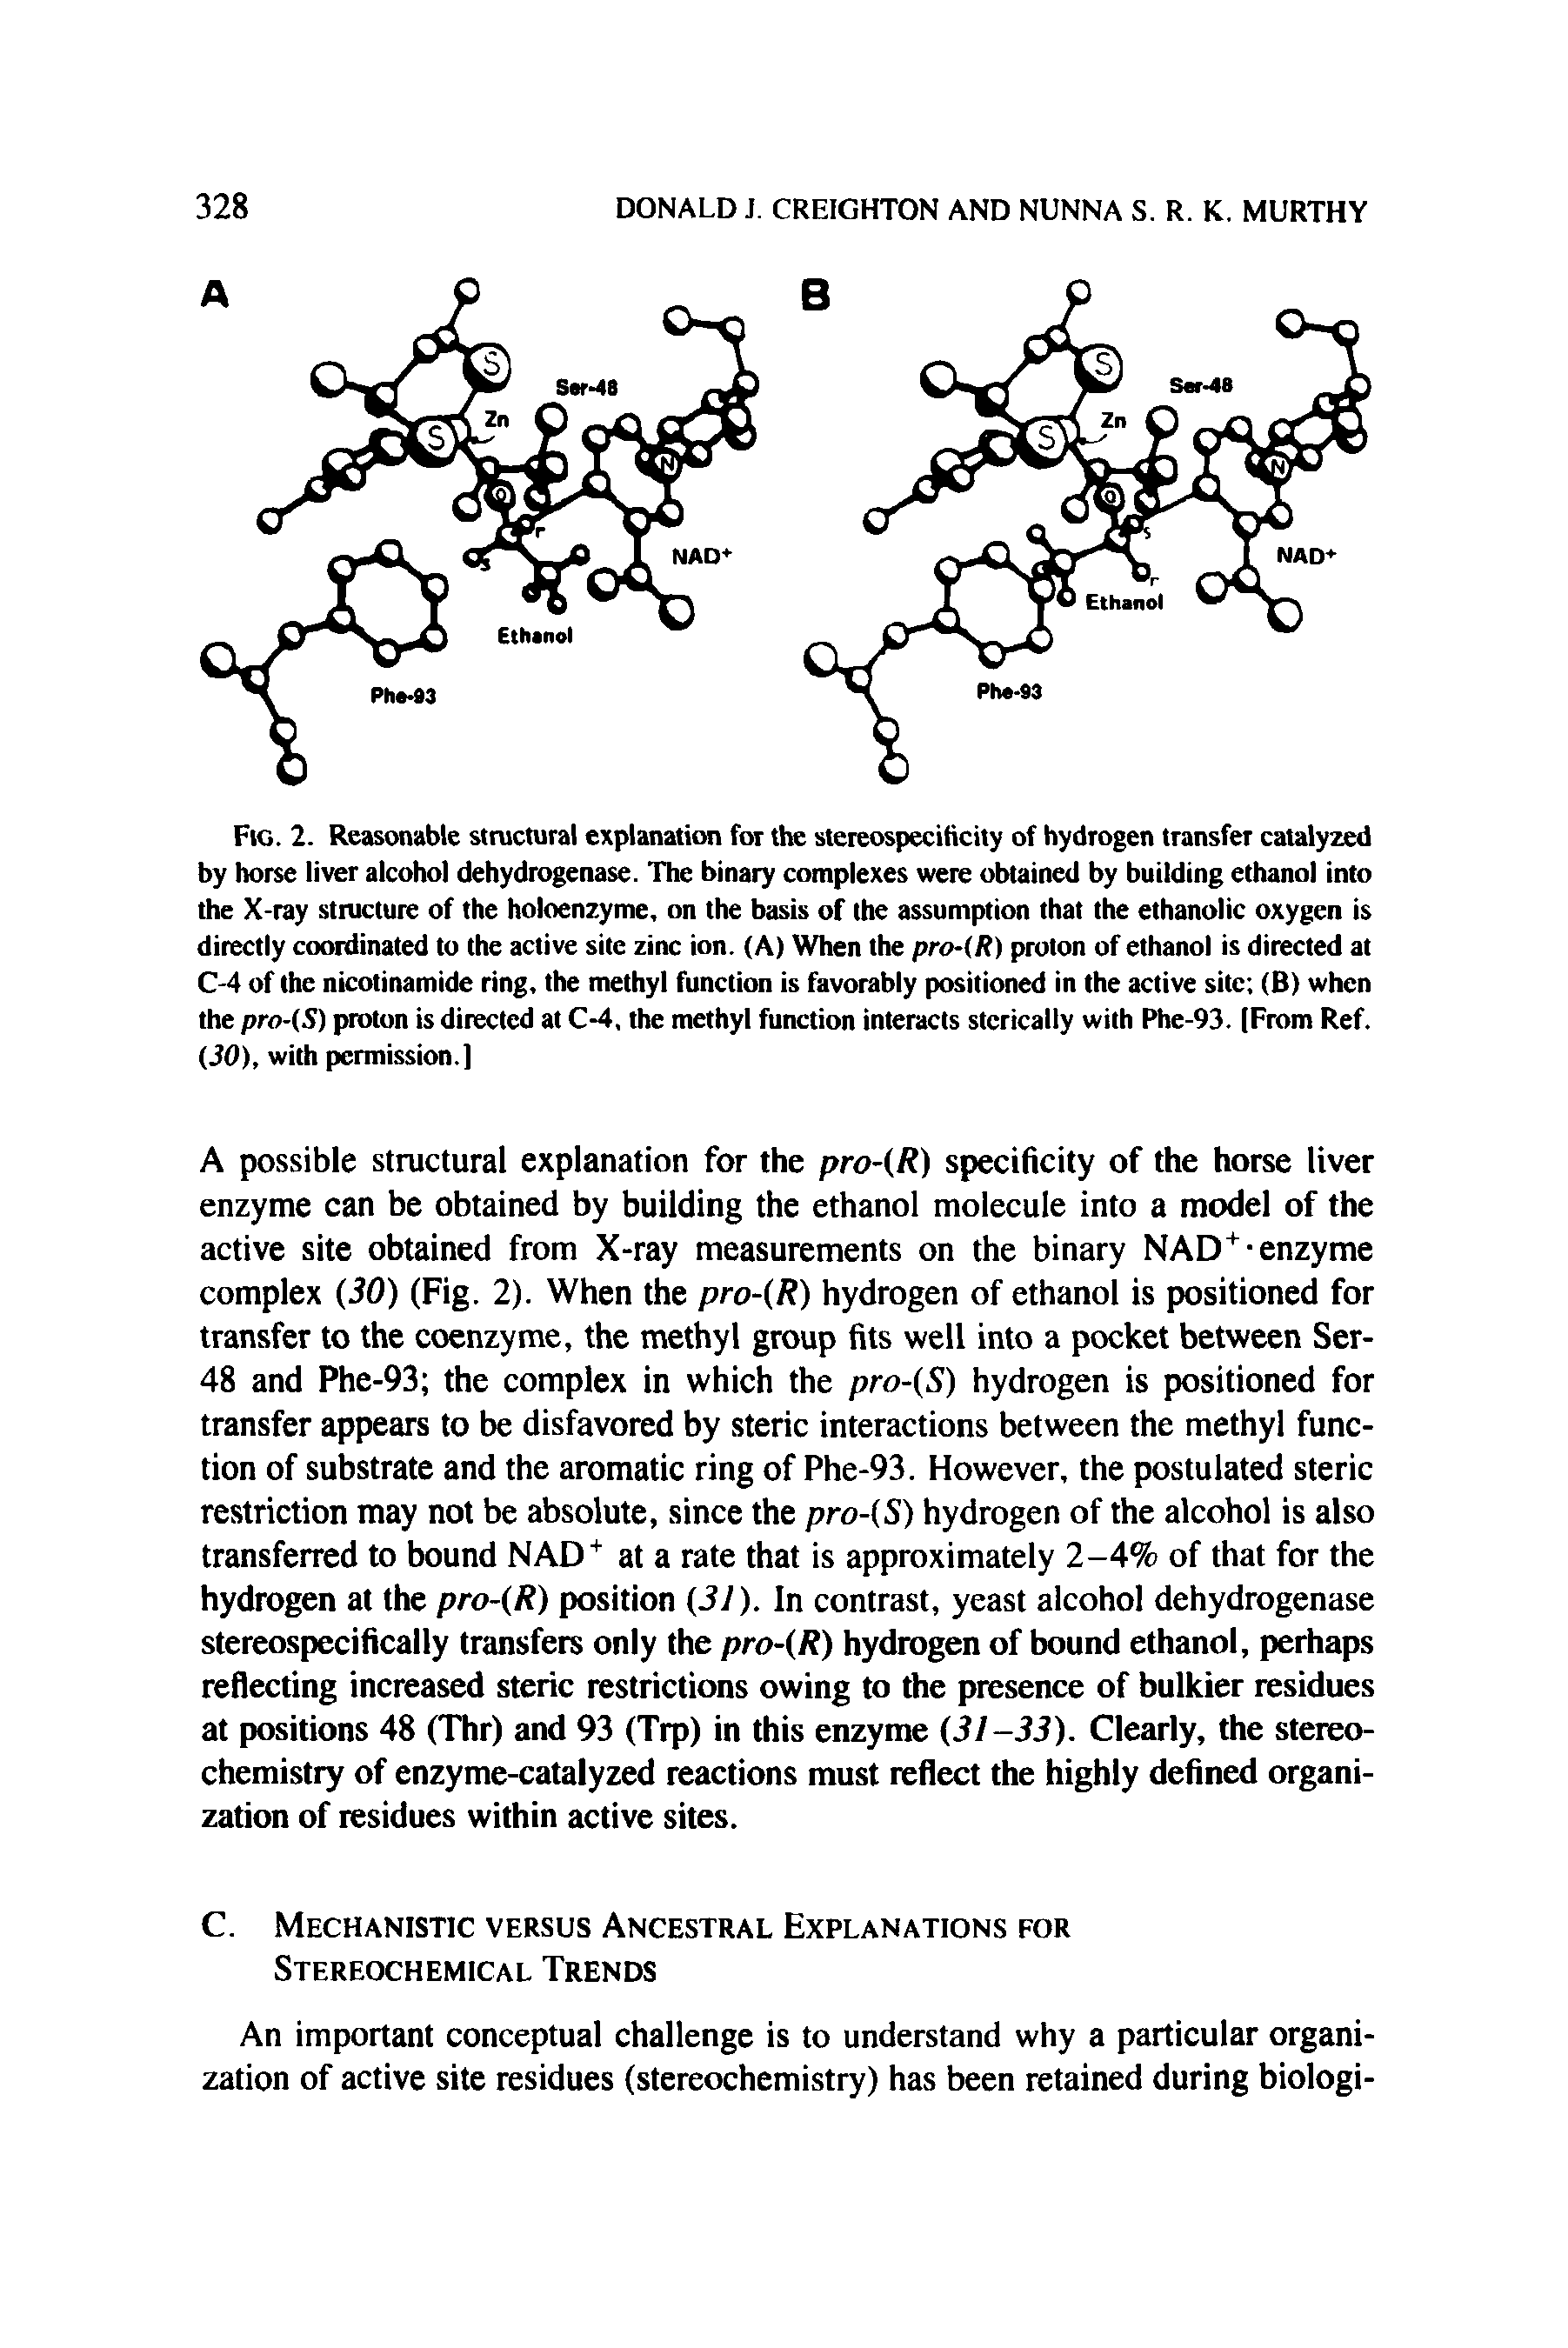 Fig. 2. Reasonable structural explanation for the stereospecilicity of hydrogen transfer catalyzed by horse liver alcohol dehydrogenase. The binary complexes were obtained by building ethanol into the X-ray structure of the holoenzyme, on the basis of the assumption that the ethanolic oxygen is directly coordinated to the active site zinc ion. (A) When the pro-(R) proton of ethanol is directed at C-4 of the nicotinamide ring, the methyl function is favorably positioned in the active site (B) when the pro-(S) proton is directed at C-4, the methyl function interacts stcrically with Phe-93. (From Ref. 30), with permission.]...